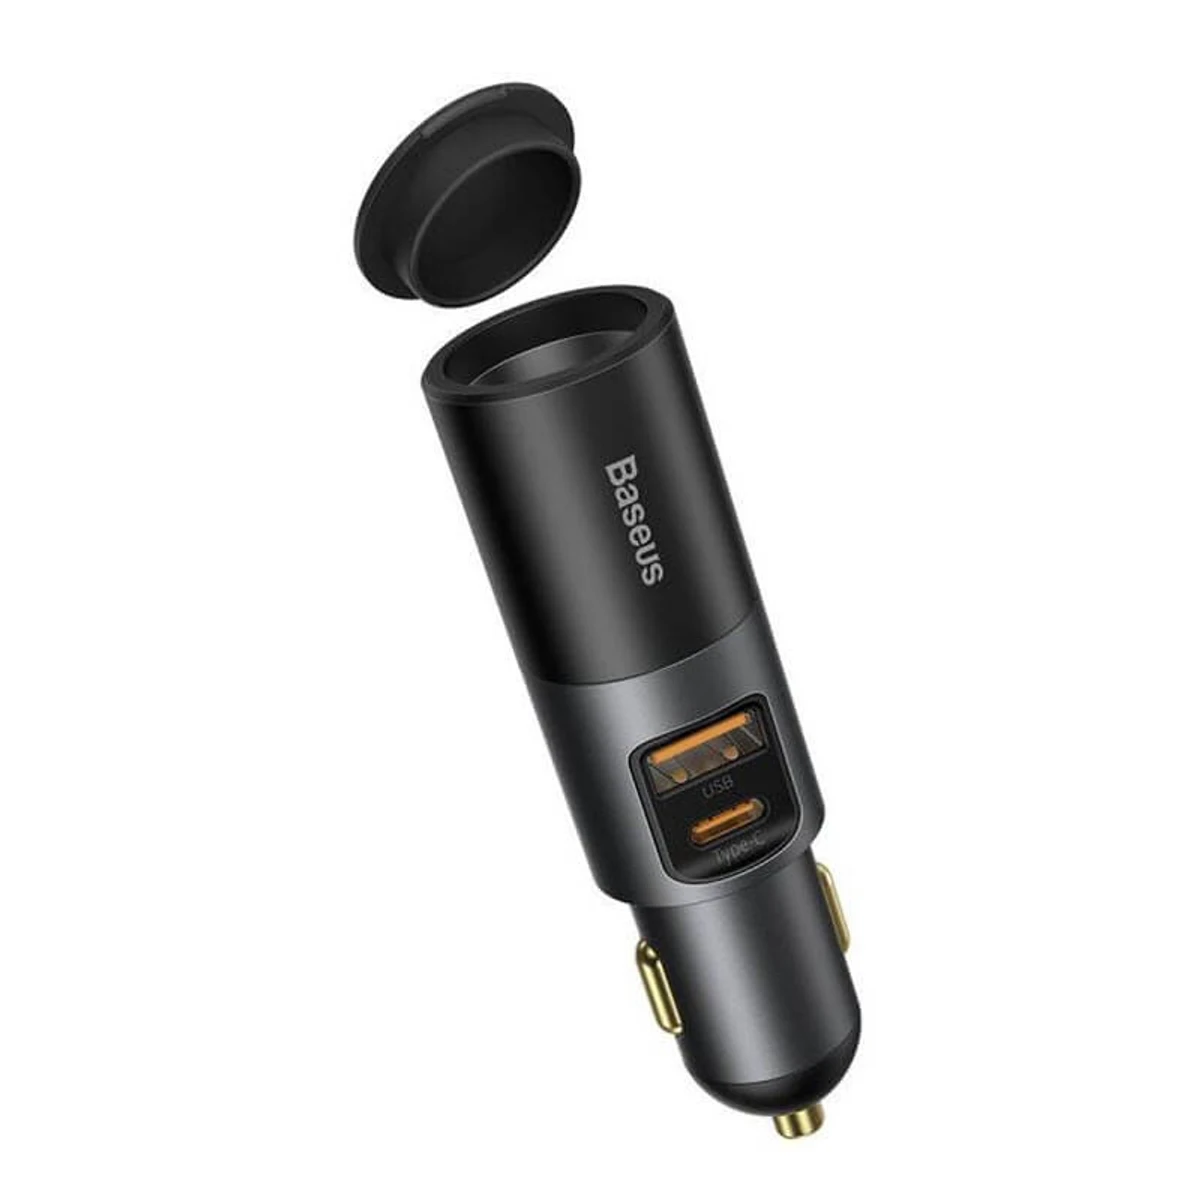 Baseus Share Together Quick Charge Car Charger with Cigarette Lighter U+C 120W